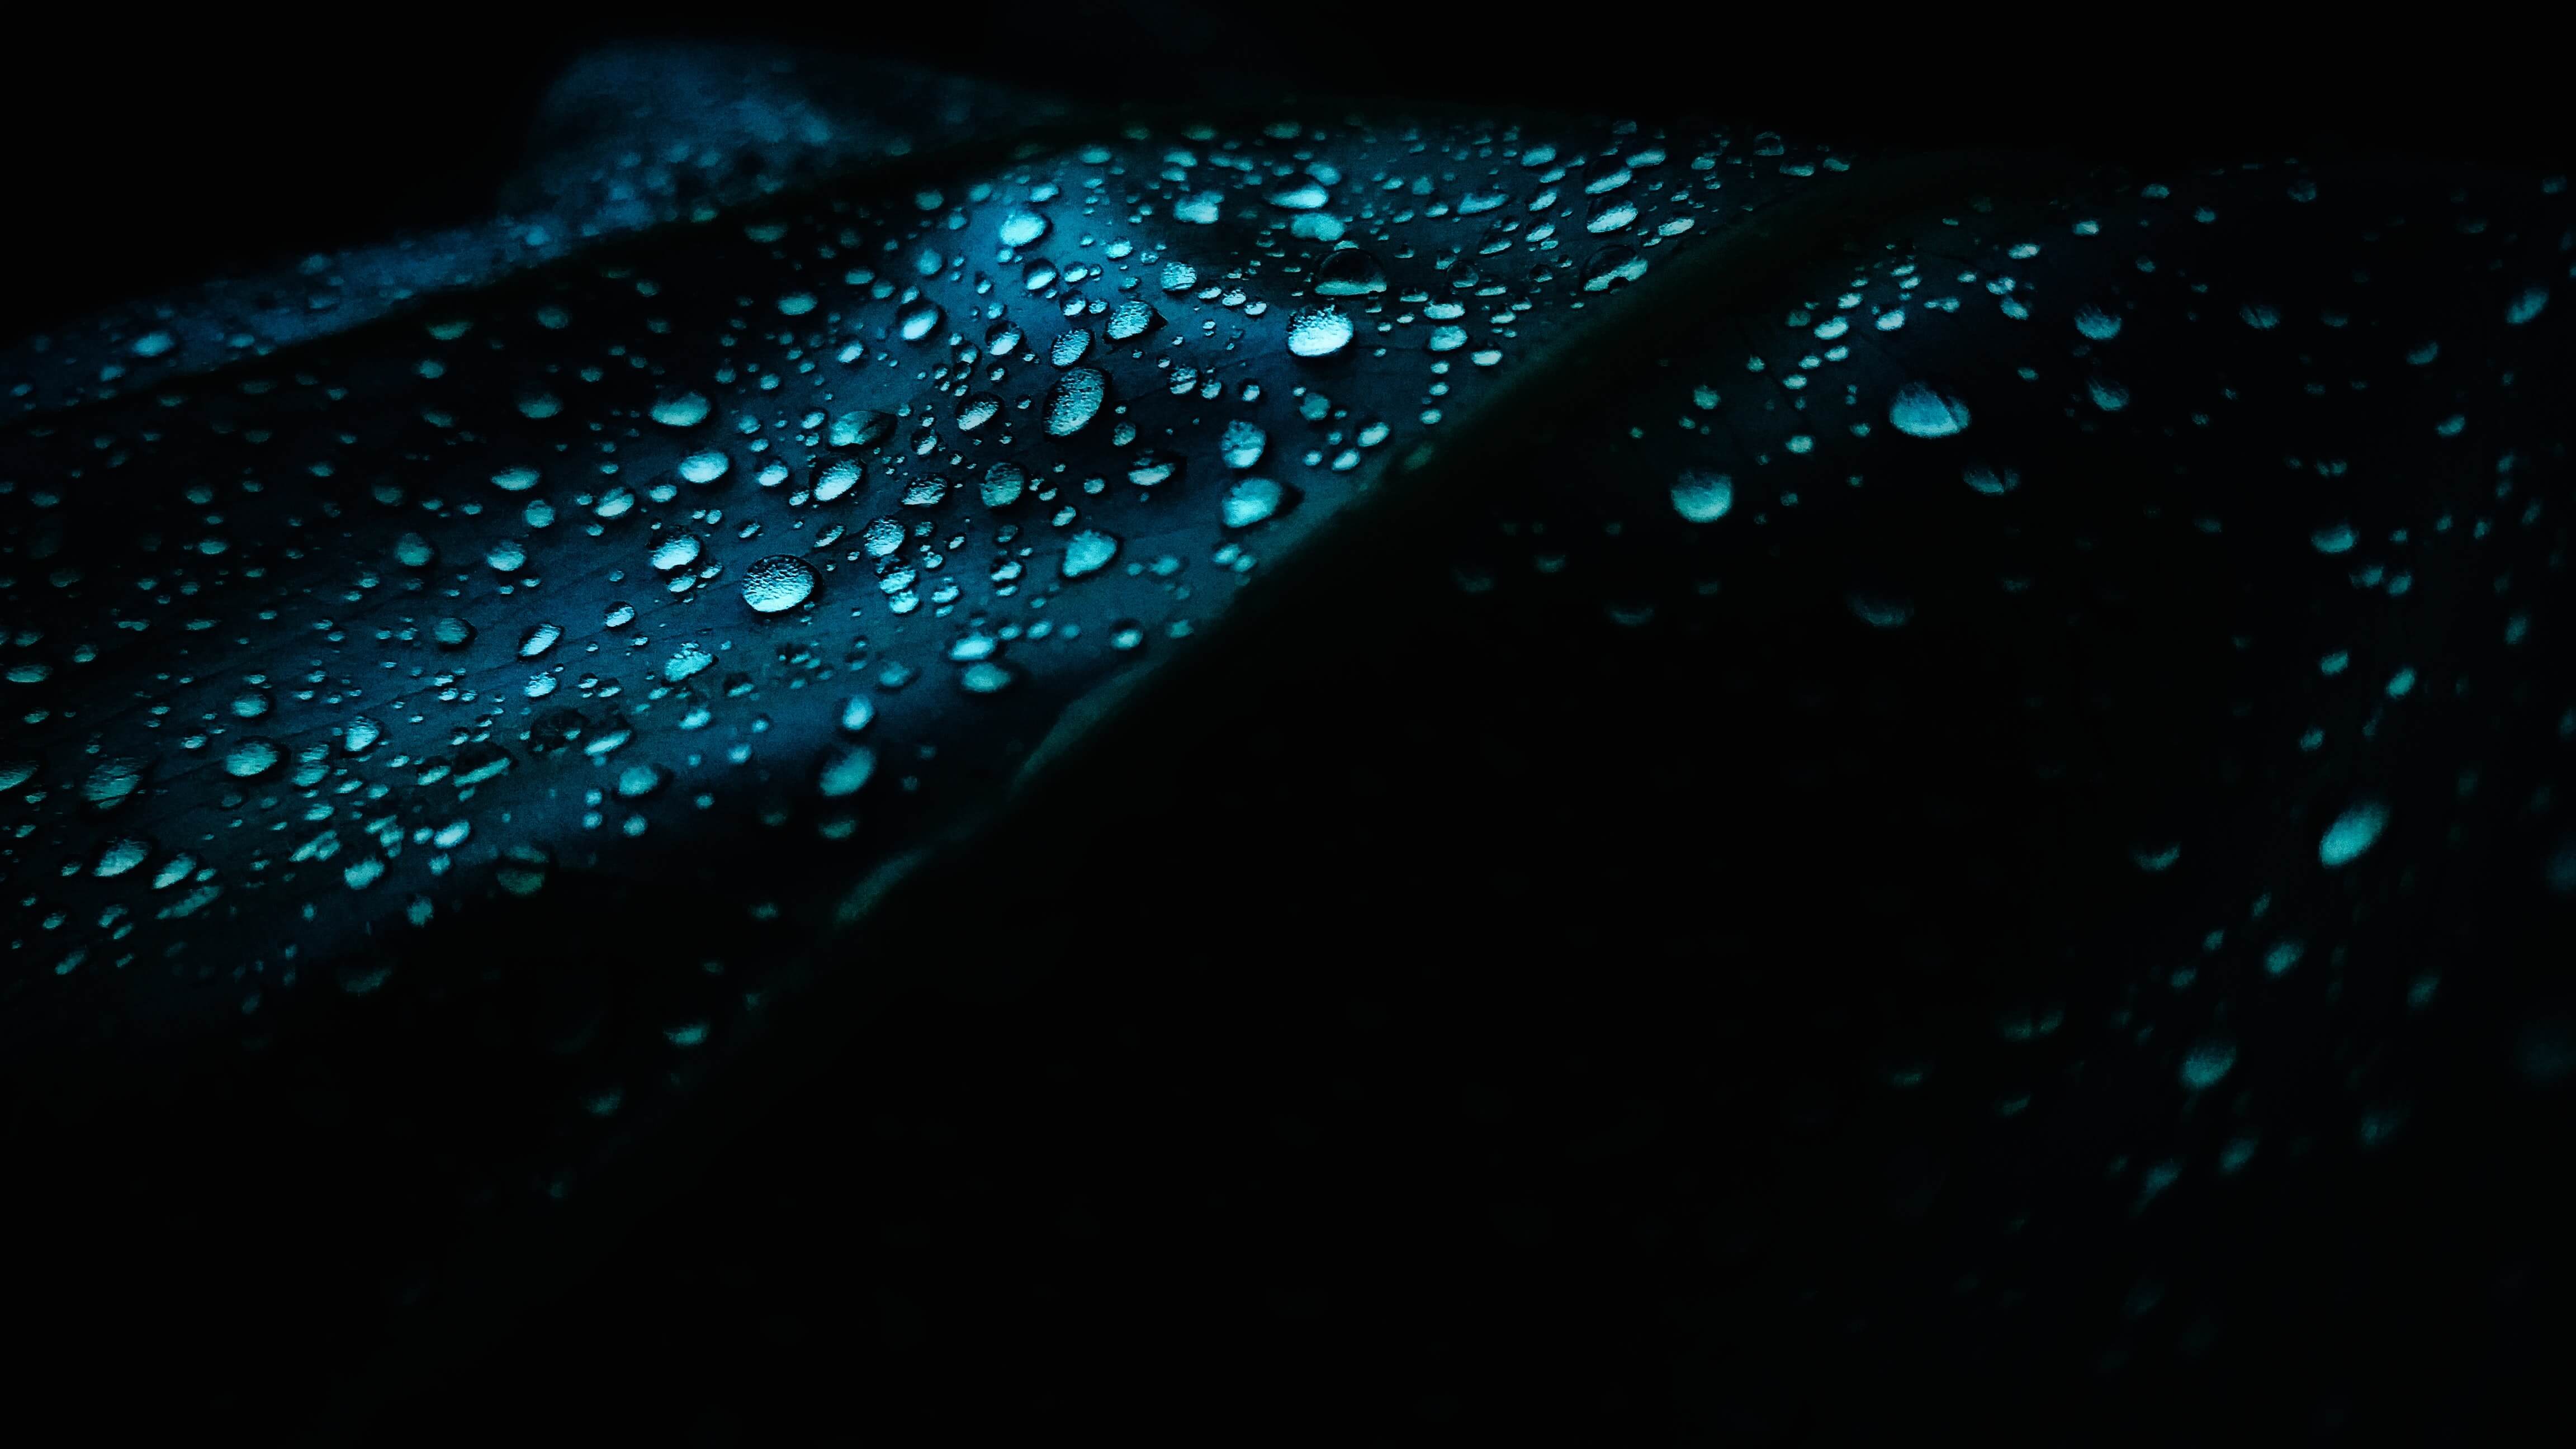 Water-repellent technologies for the outdoor market